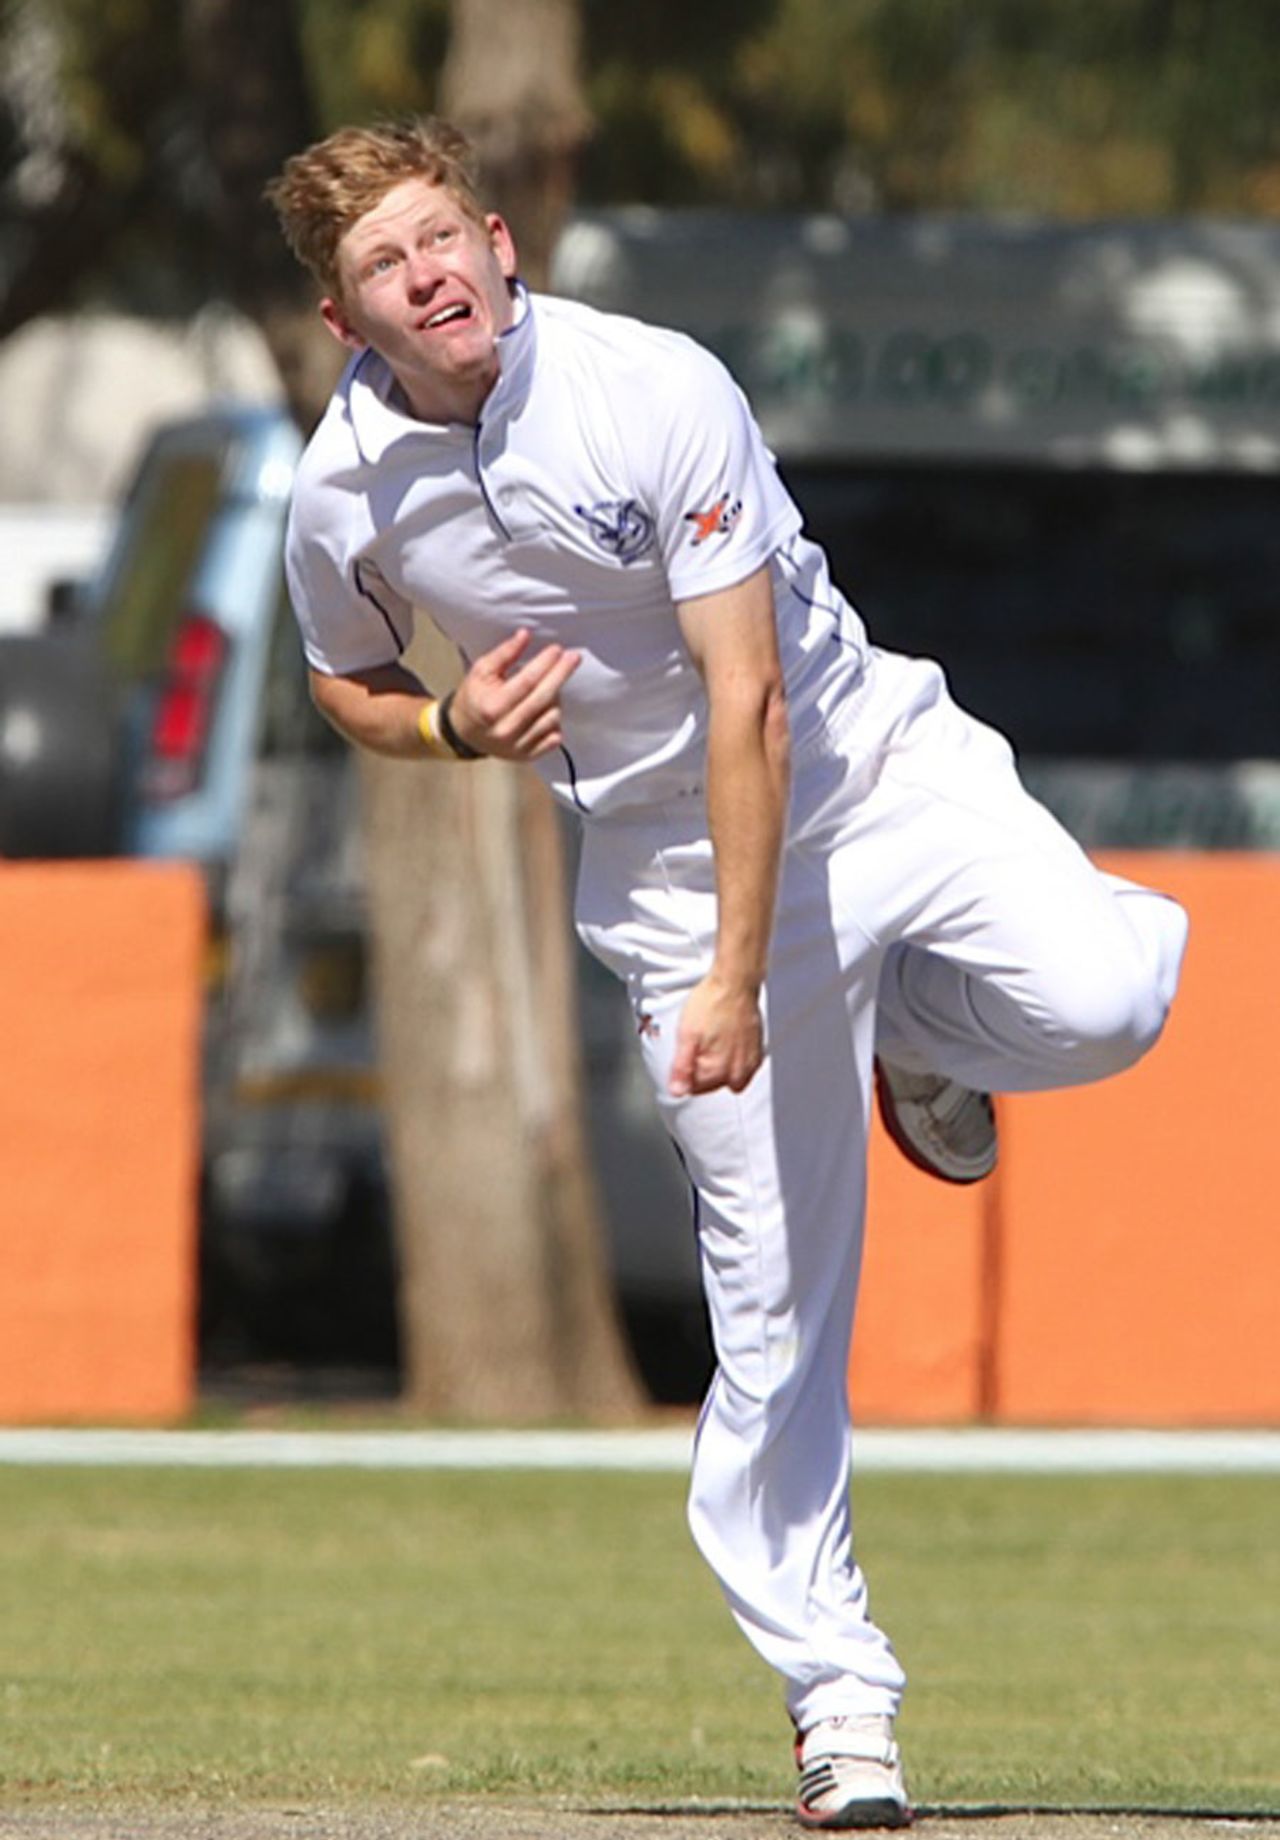 Bernard Scholtz in his delivery stride, Namibia v Afghanistan, ICC Intercontinental Cup, 2nd day, Windhoek, August 5, 2013